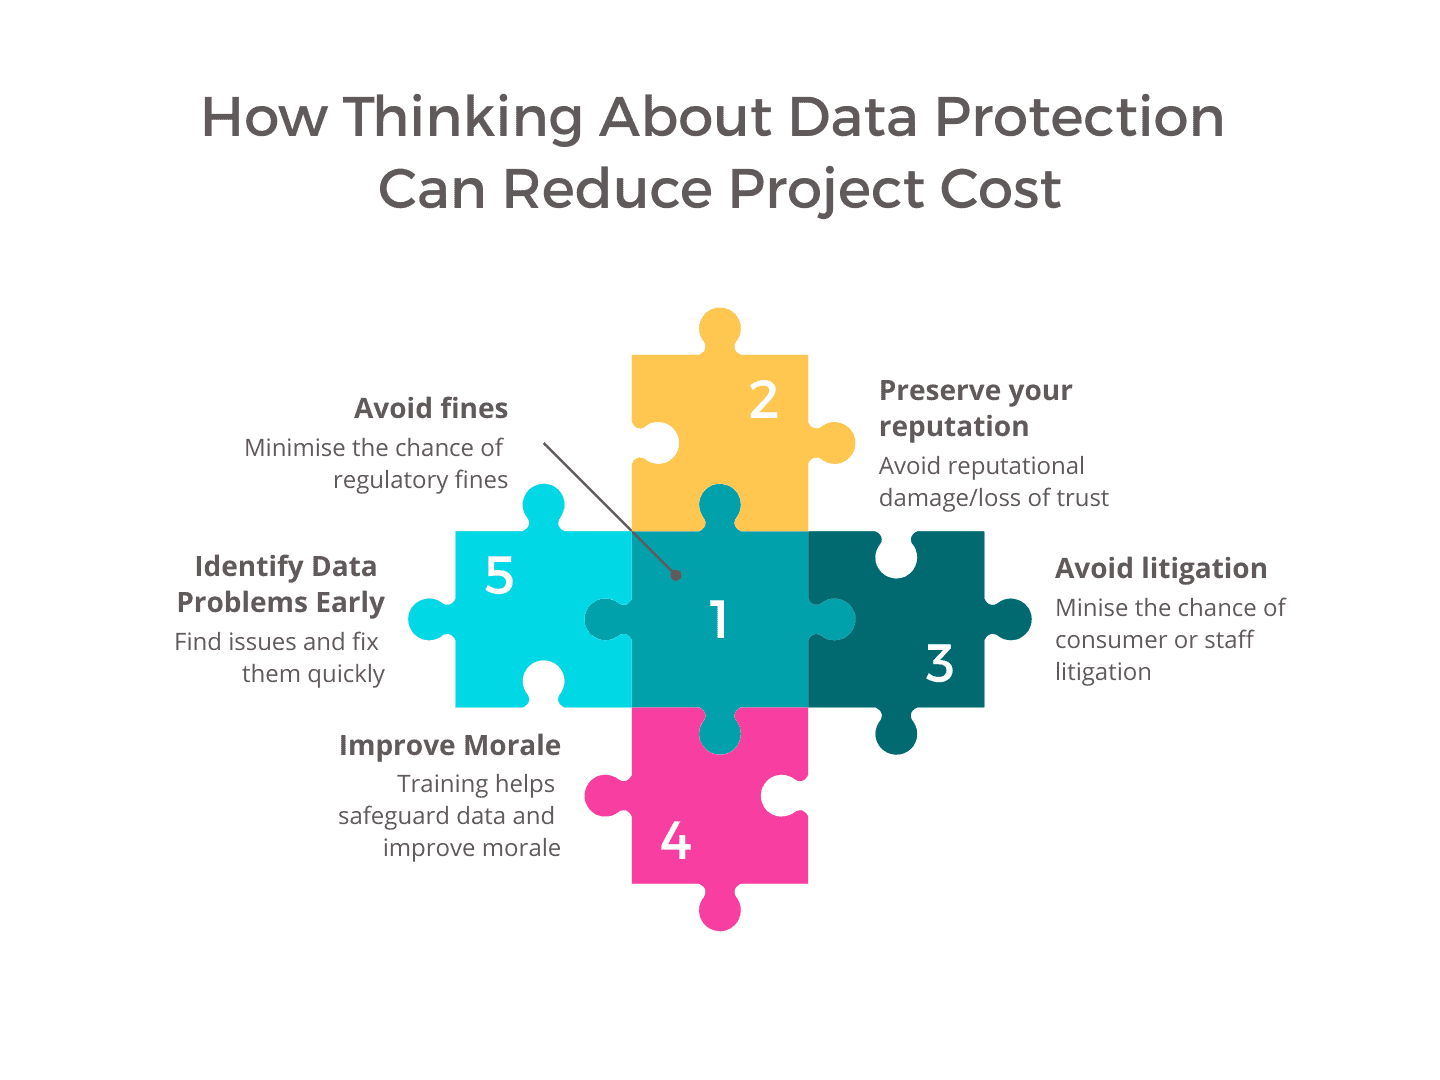 data protection and project cost infographic